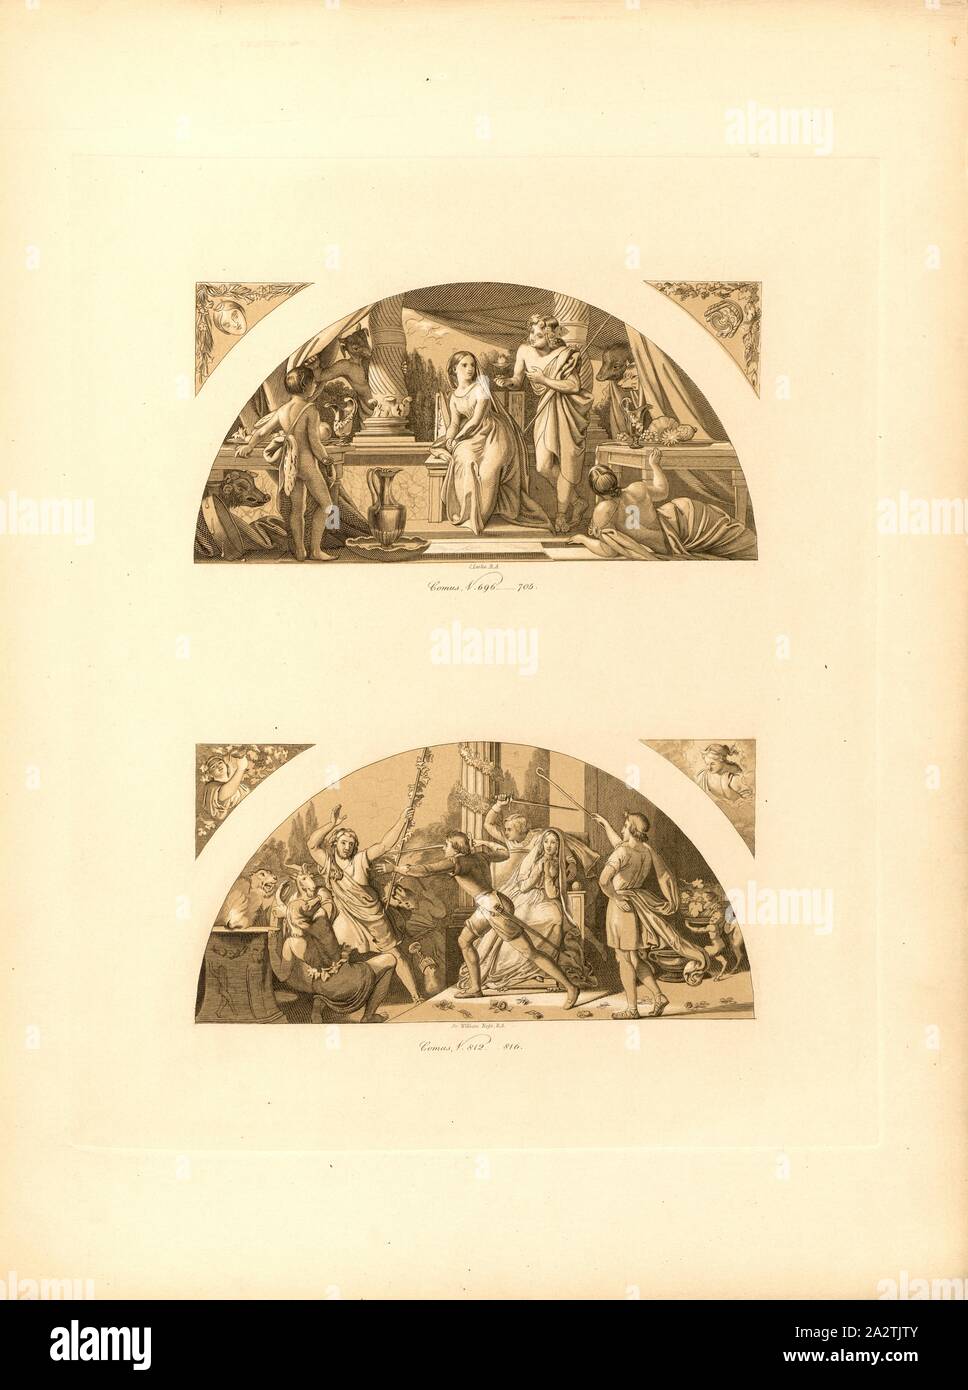 Comus, V. 696-705, Comus, V. 812-816, Wall Paintings with scenes from the poem 'Masque of Comus' by John Milton (Pavilion, Buckingham Palace Gardens), signed: C. Leslie, R.A, Sir William Ross, R.A., Taf. 8, p. 11, Leslie, Charles; Ross, William, Ludwig Gruner; Anna Jameson: The decorations of the garden-pavilion in the grounds of Buckingham Palace. London: publ. by John Murray; Longman & Co.; P. & D. Colnaghi; F. G. Moon; and L. Gruner, MDCCCXLVI Stock Photo